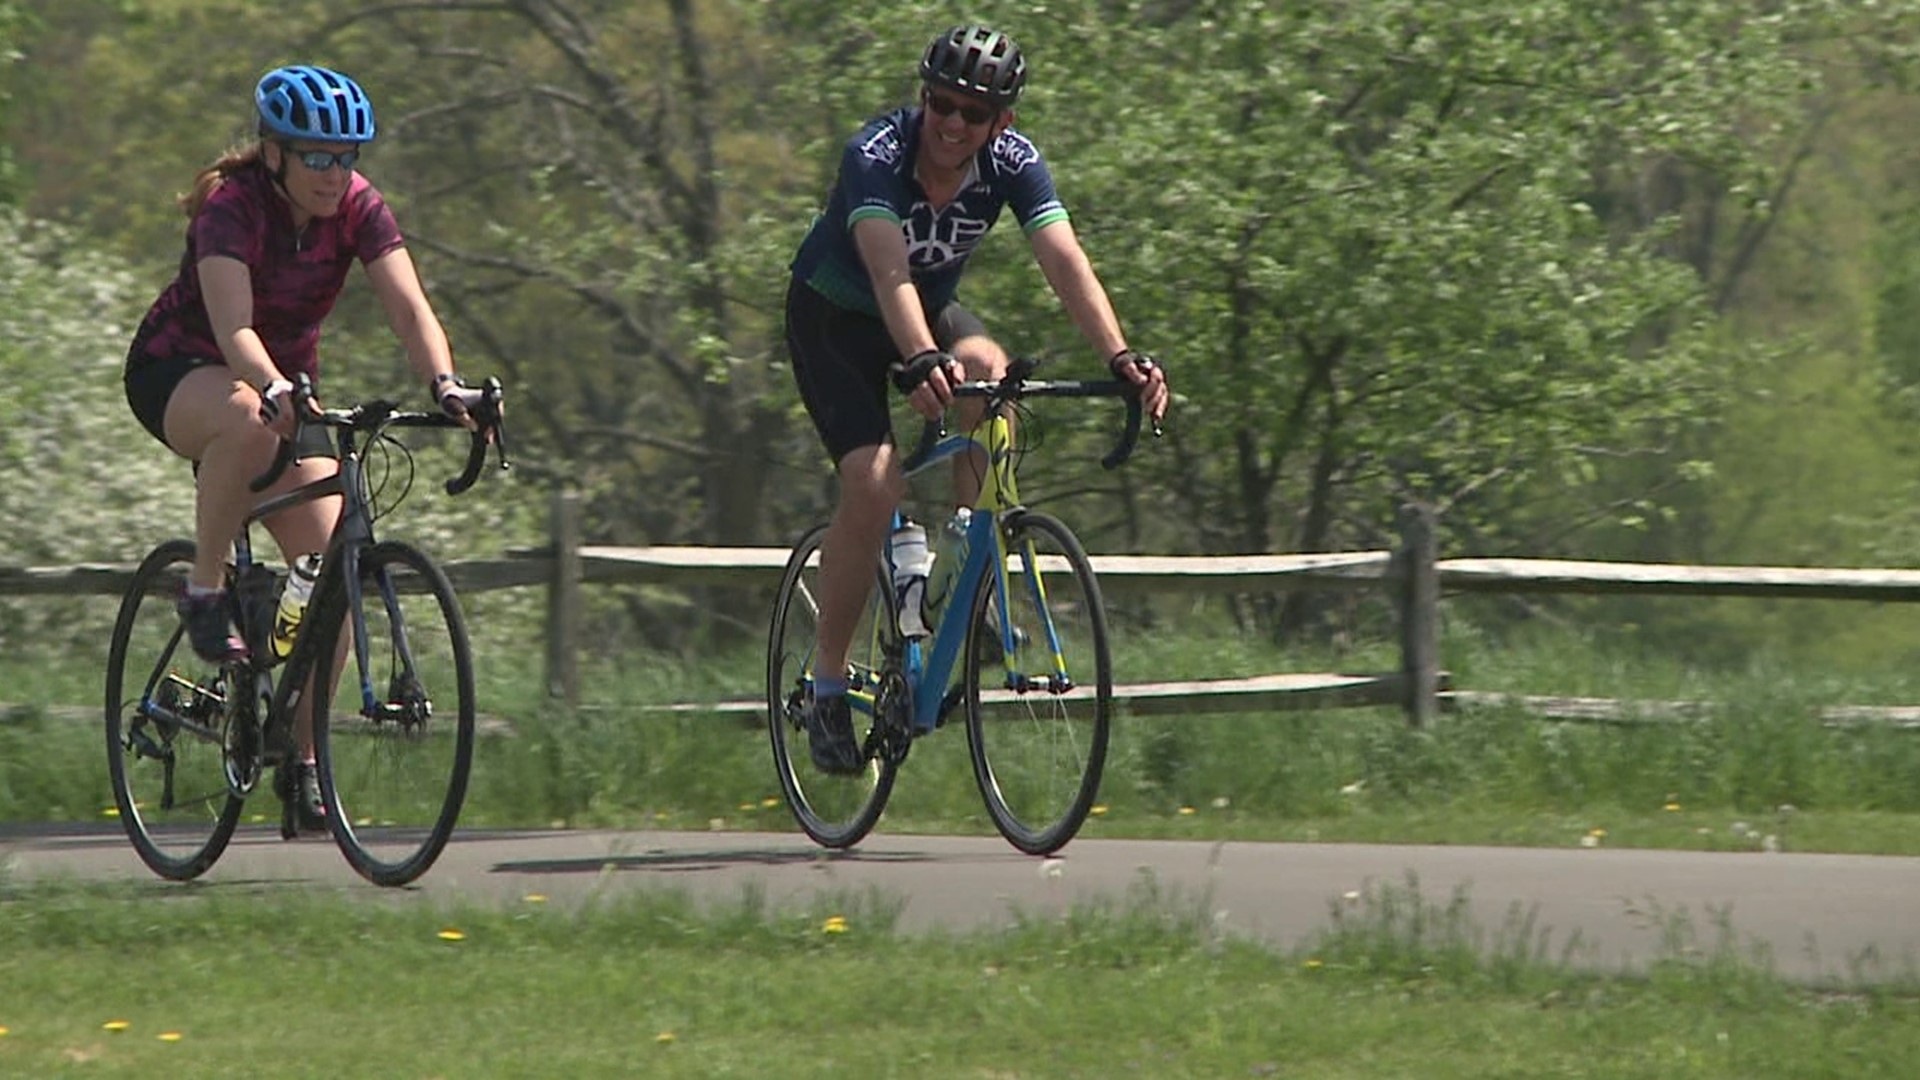 Cyclists took part in the 13th Annual Spencer Martin Memorial Bike Ride for Habitat began at 9 a.m. on Sunday.